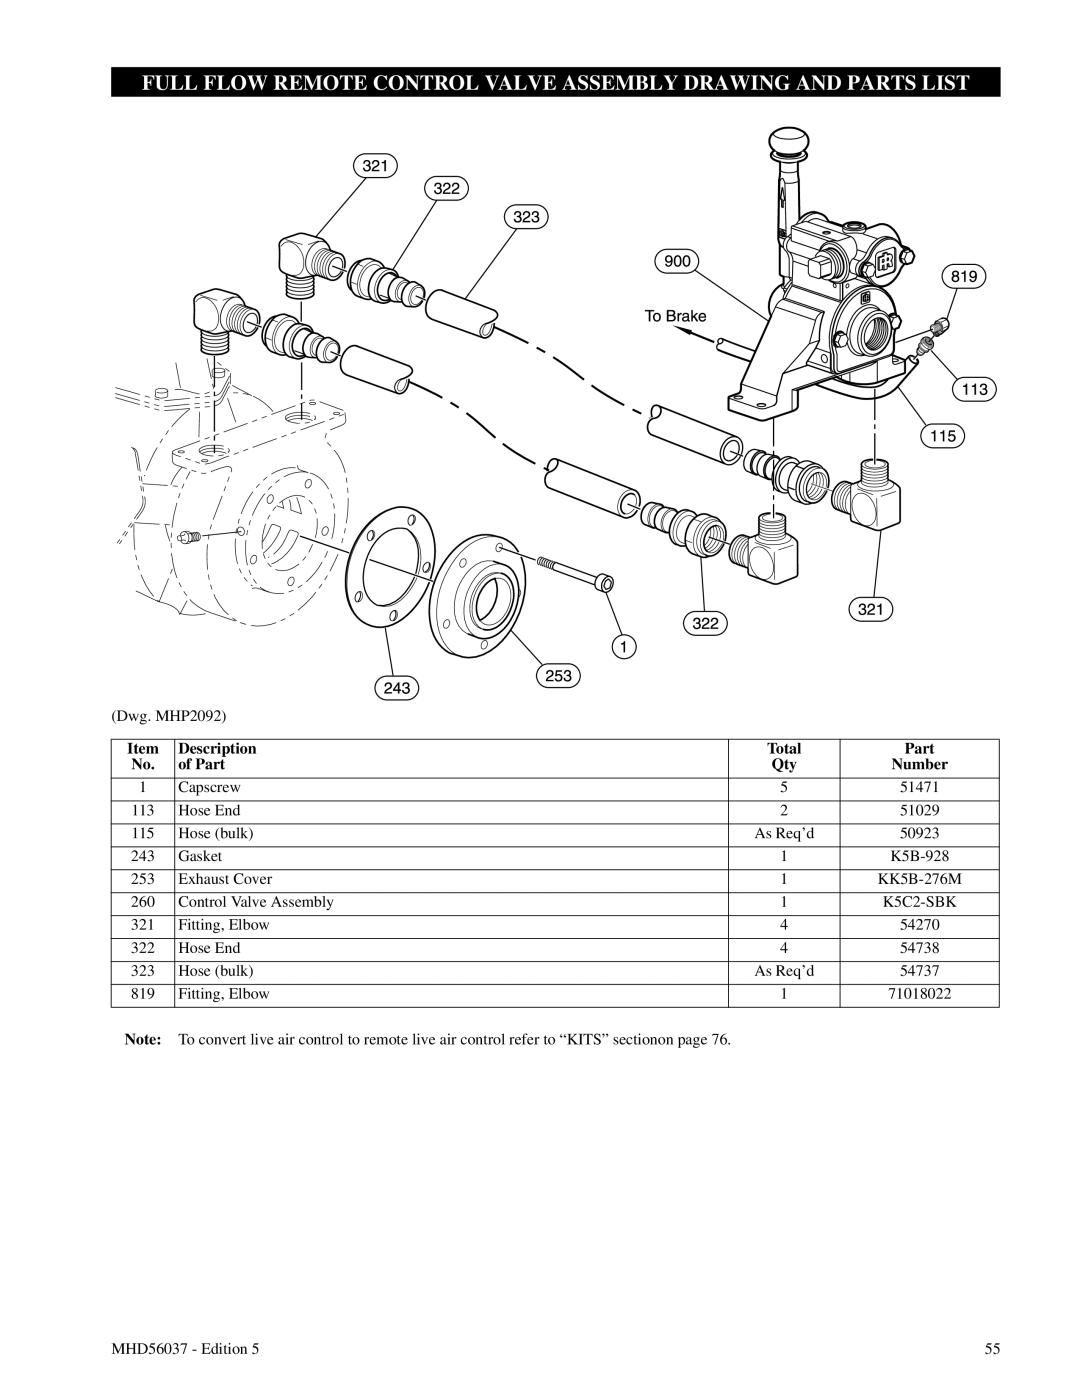 Ingersoll-Rand FA5T manual Full Flow Remote Control Valve Assembly Drawing And Parts List, Description, of Part 